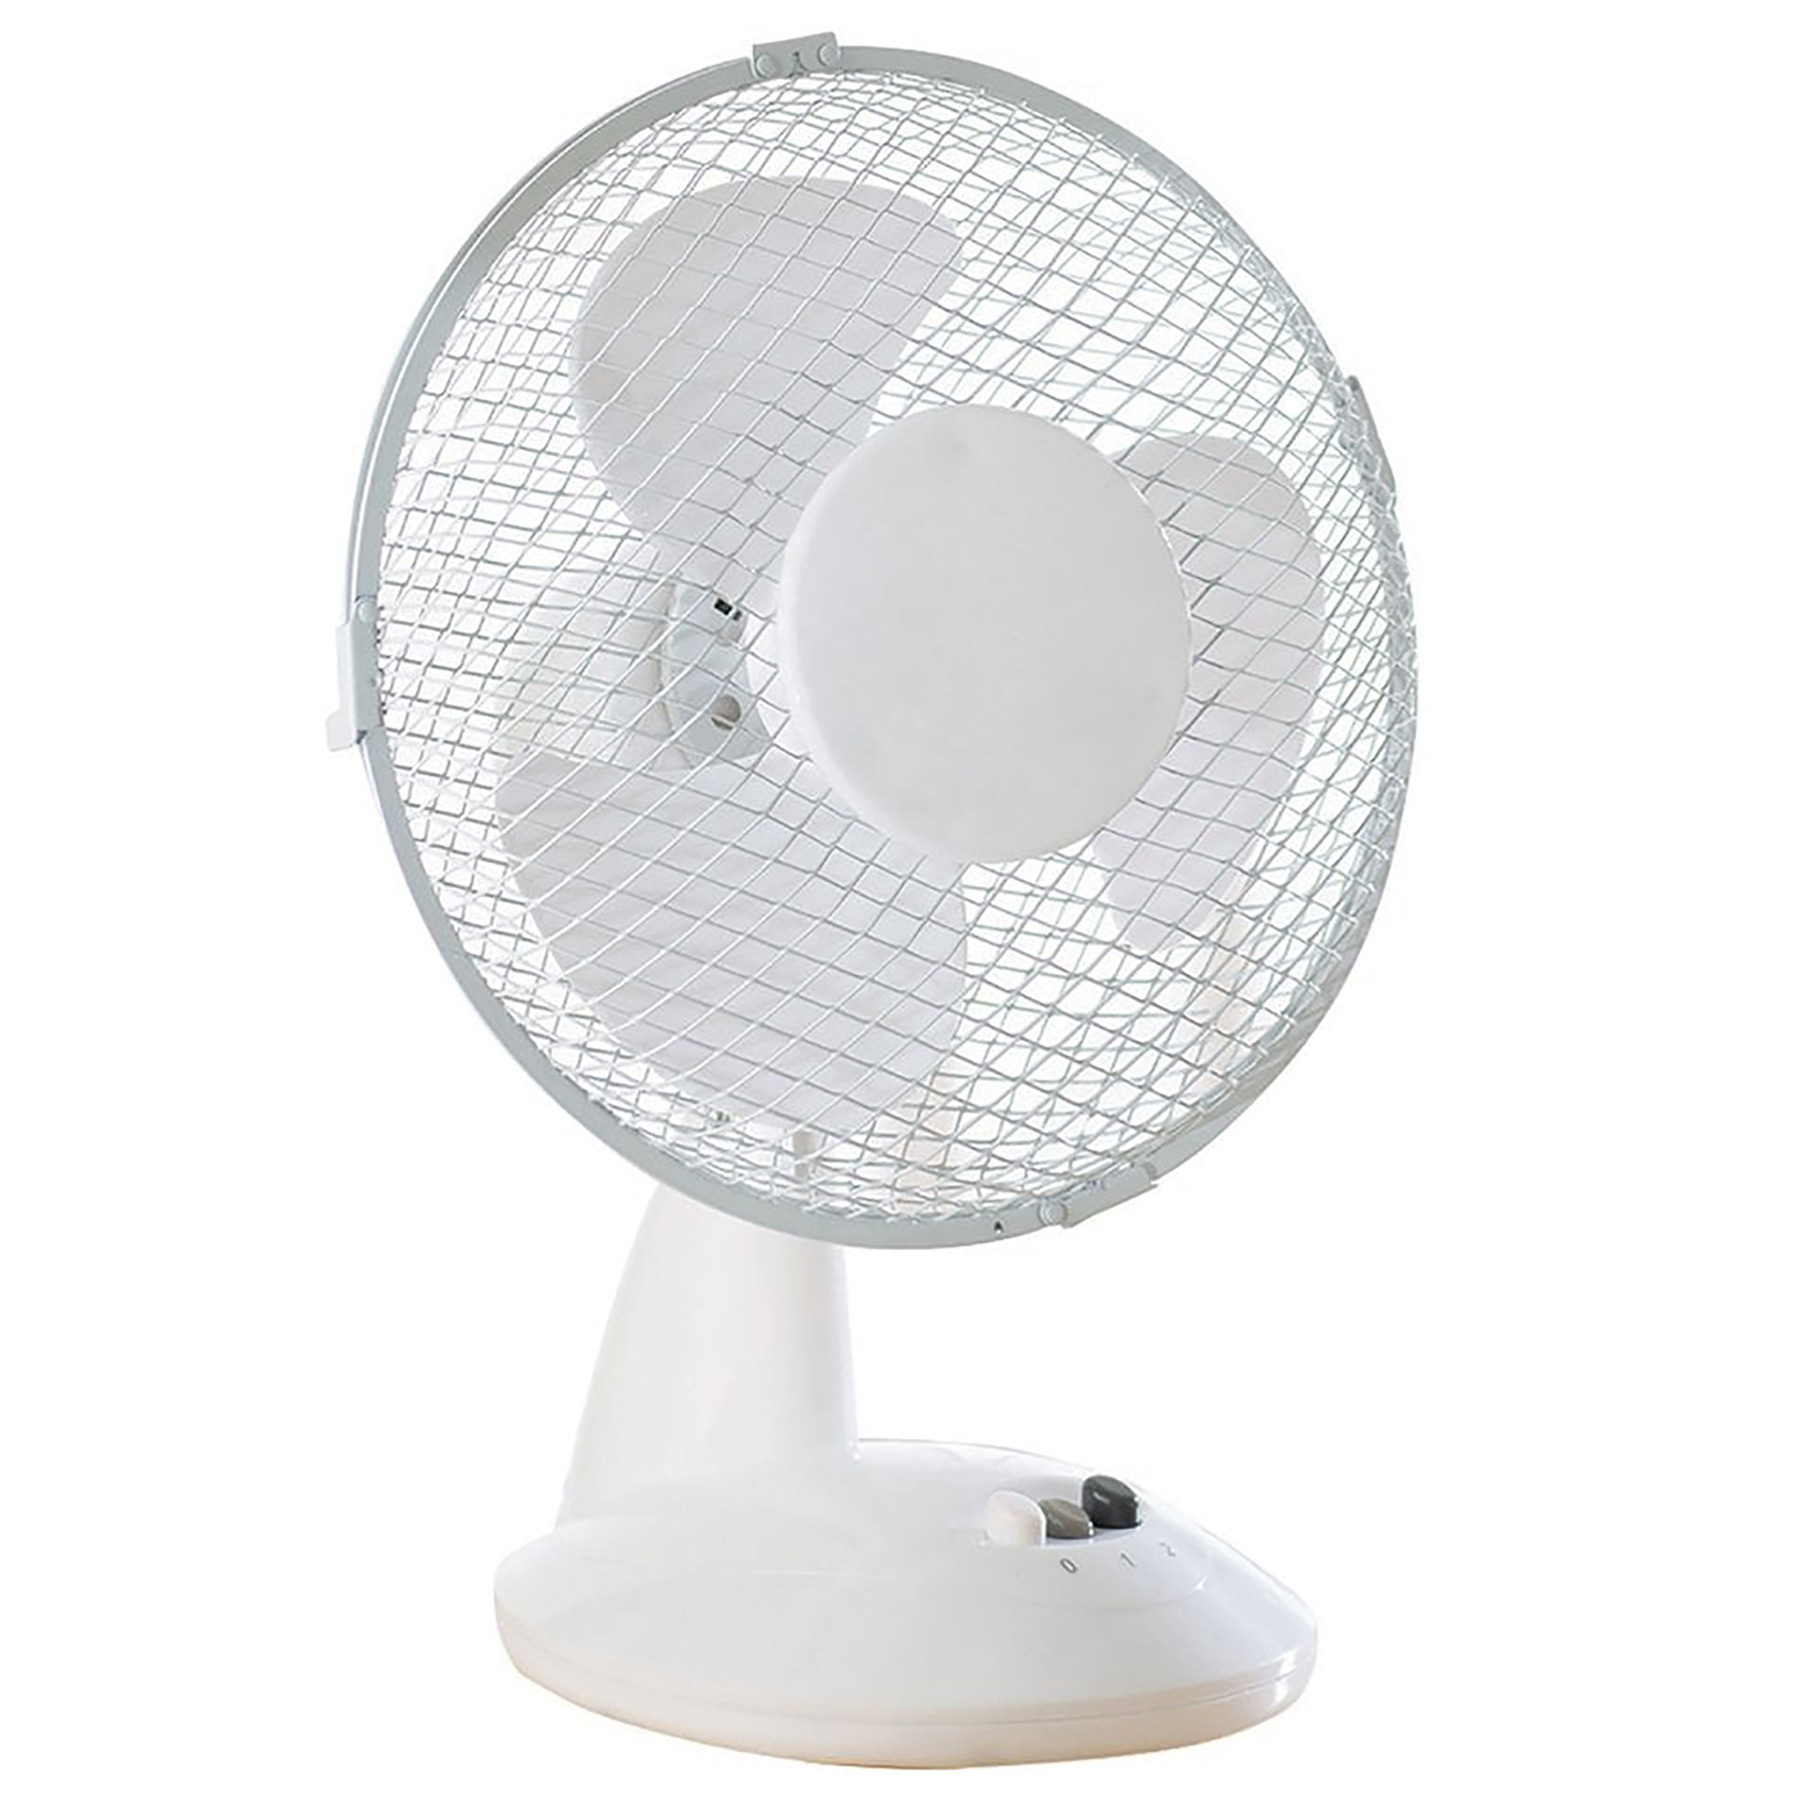 Image of Daewoo COL1062GE 9 Inch Oscillating Table Fan in White 2 Speeds